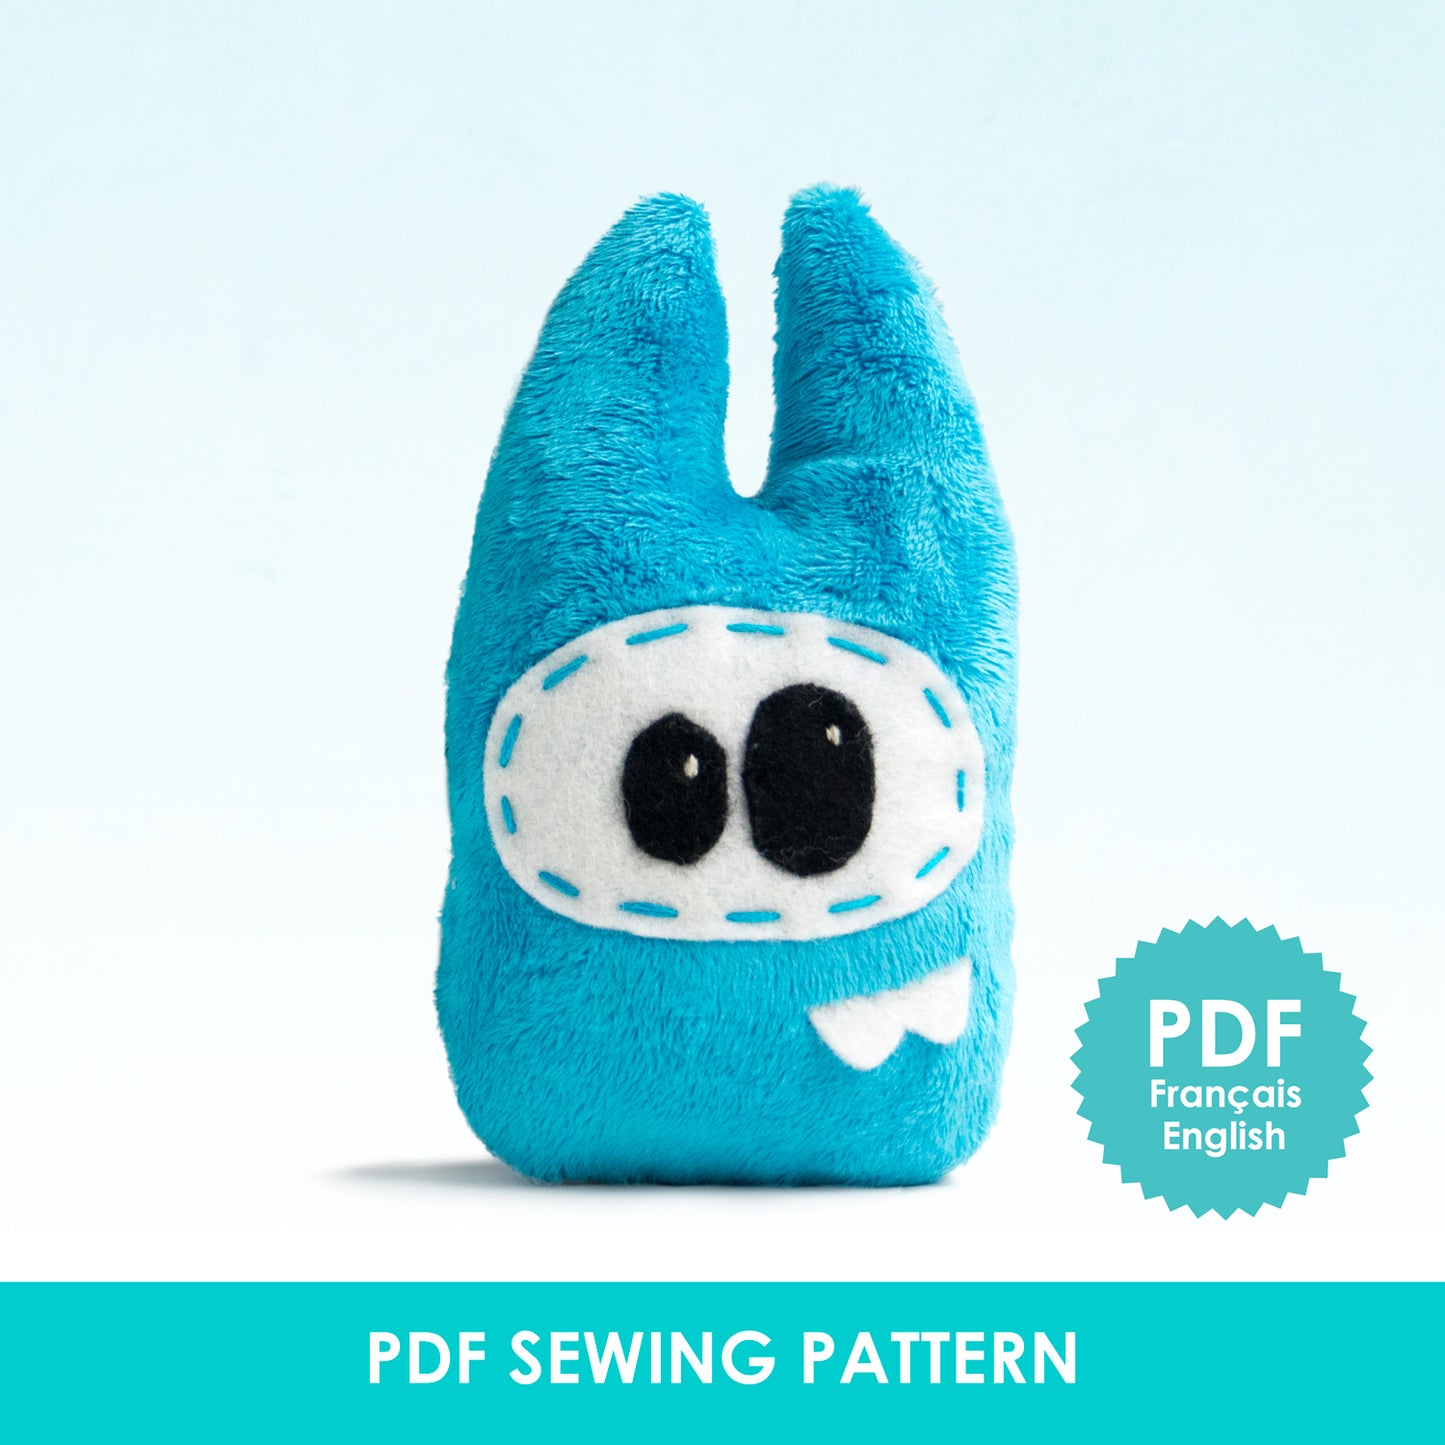 pdf-sewing-pattern-blue-monster-petitloulou